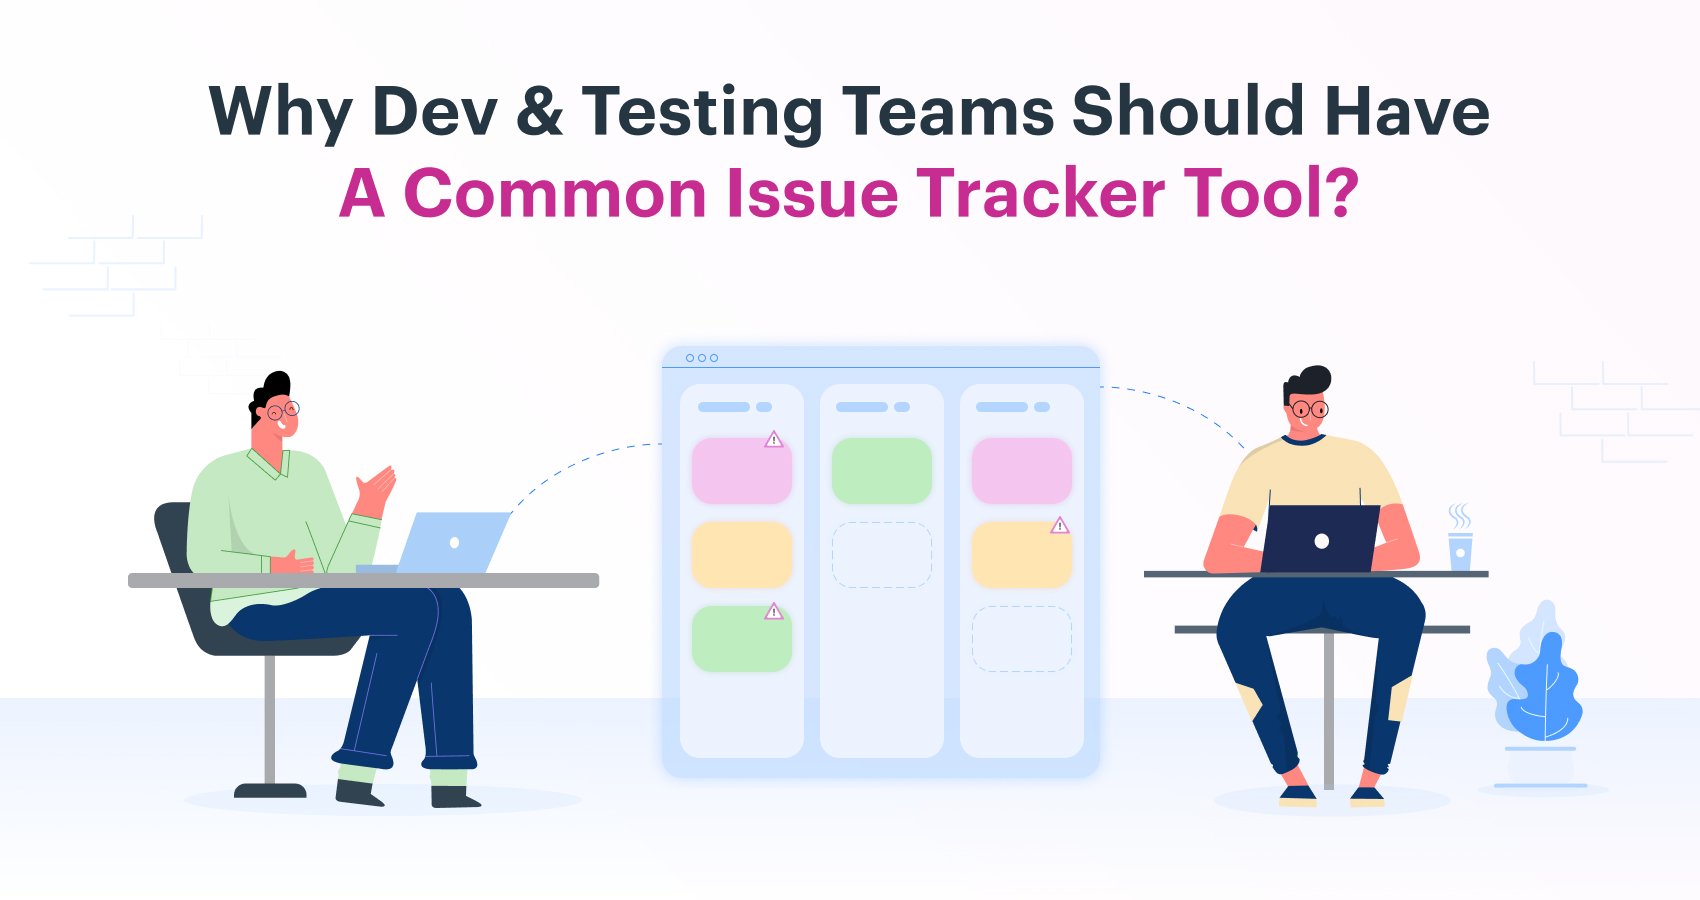 Why Dev & Testing teams should have a common issue tracker tool?